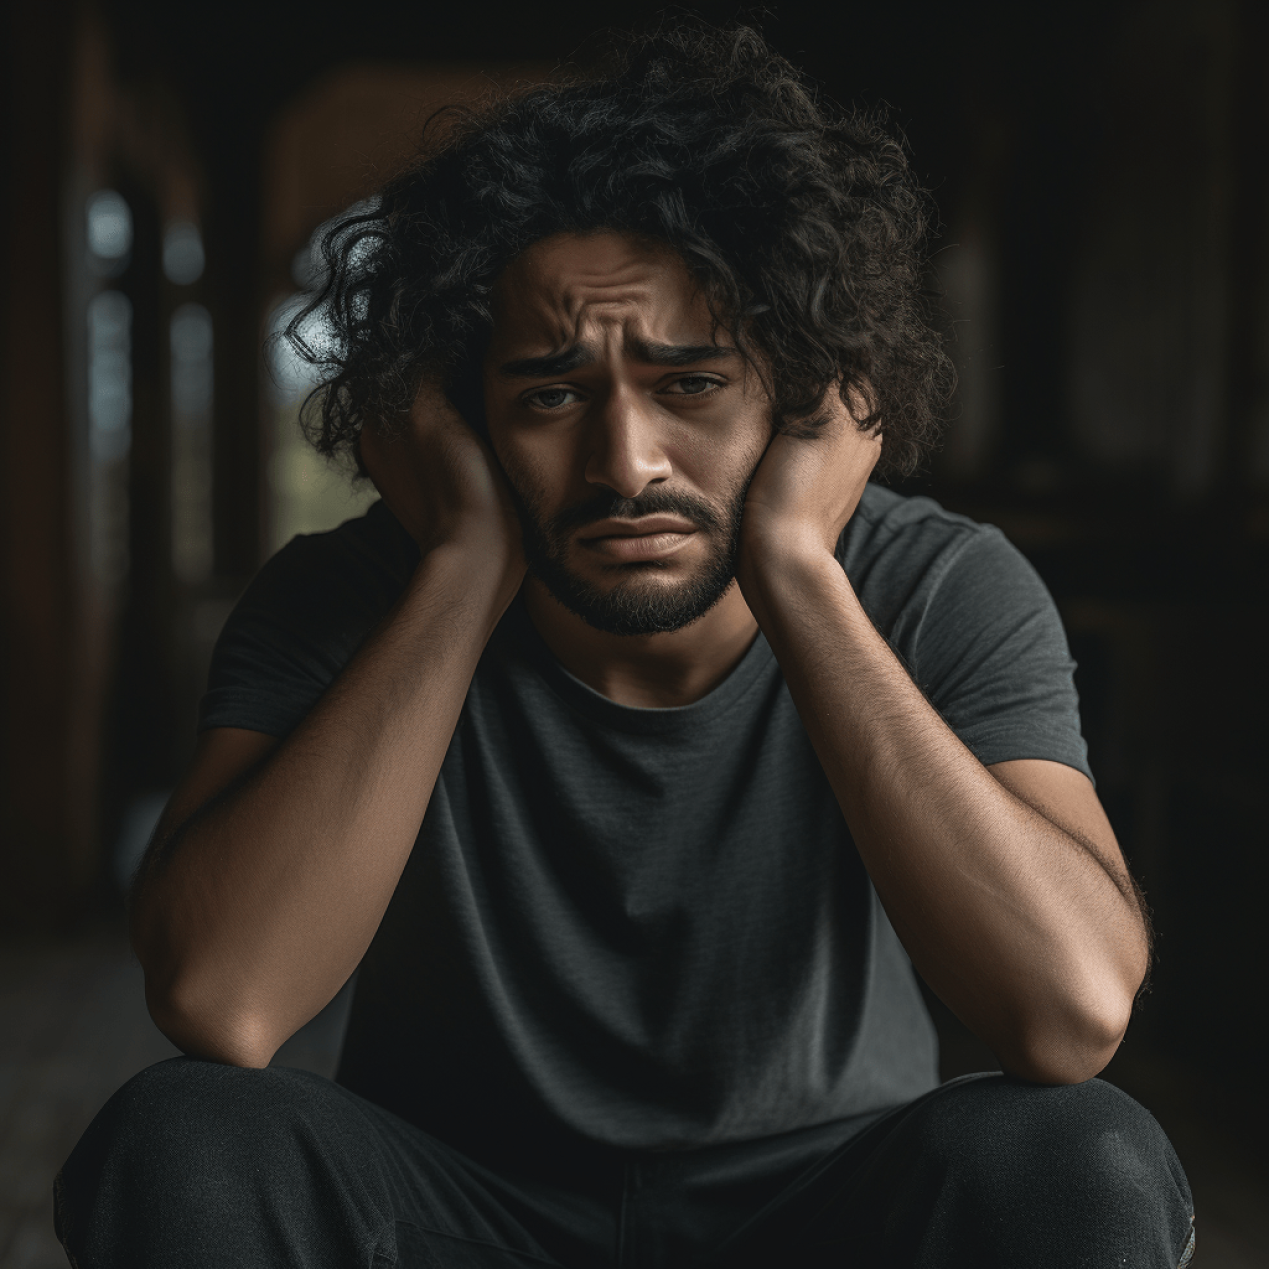 Unseen Struggles 10 Subtle Signs of Depression Often Overlooked